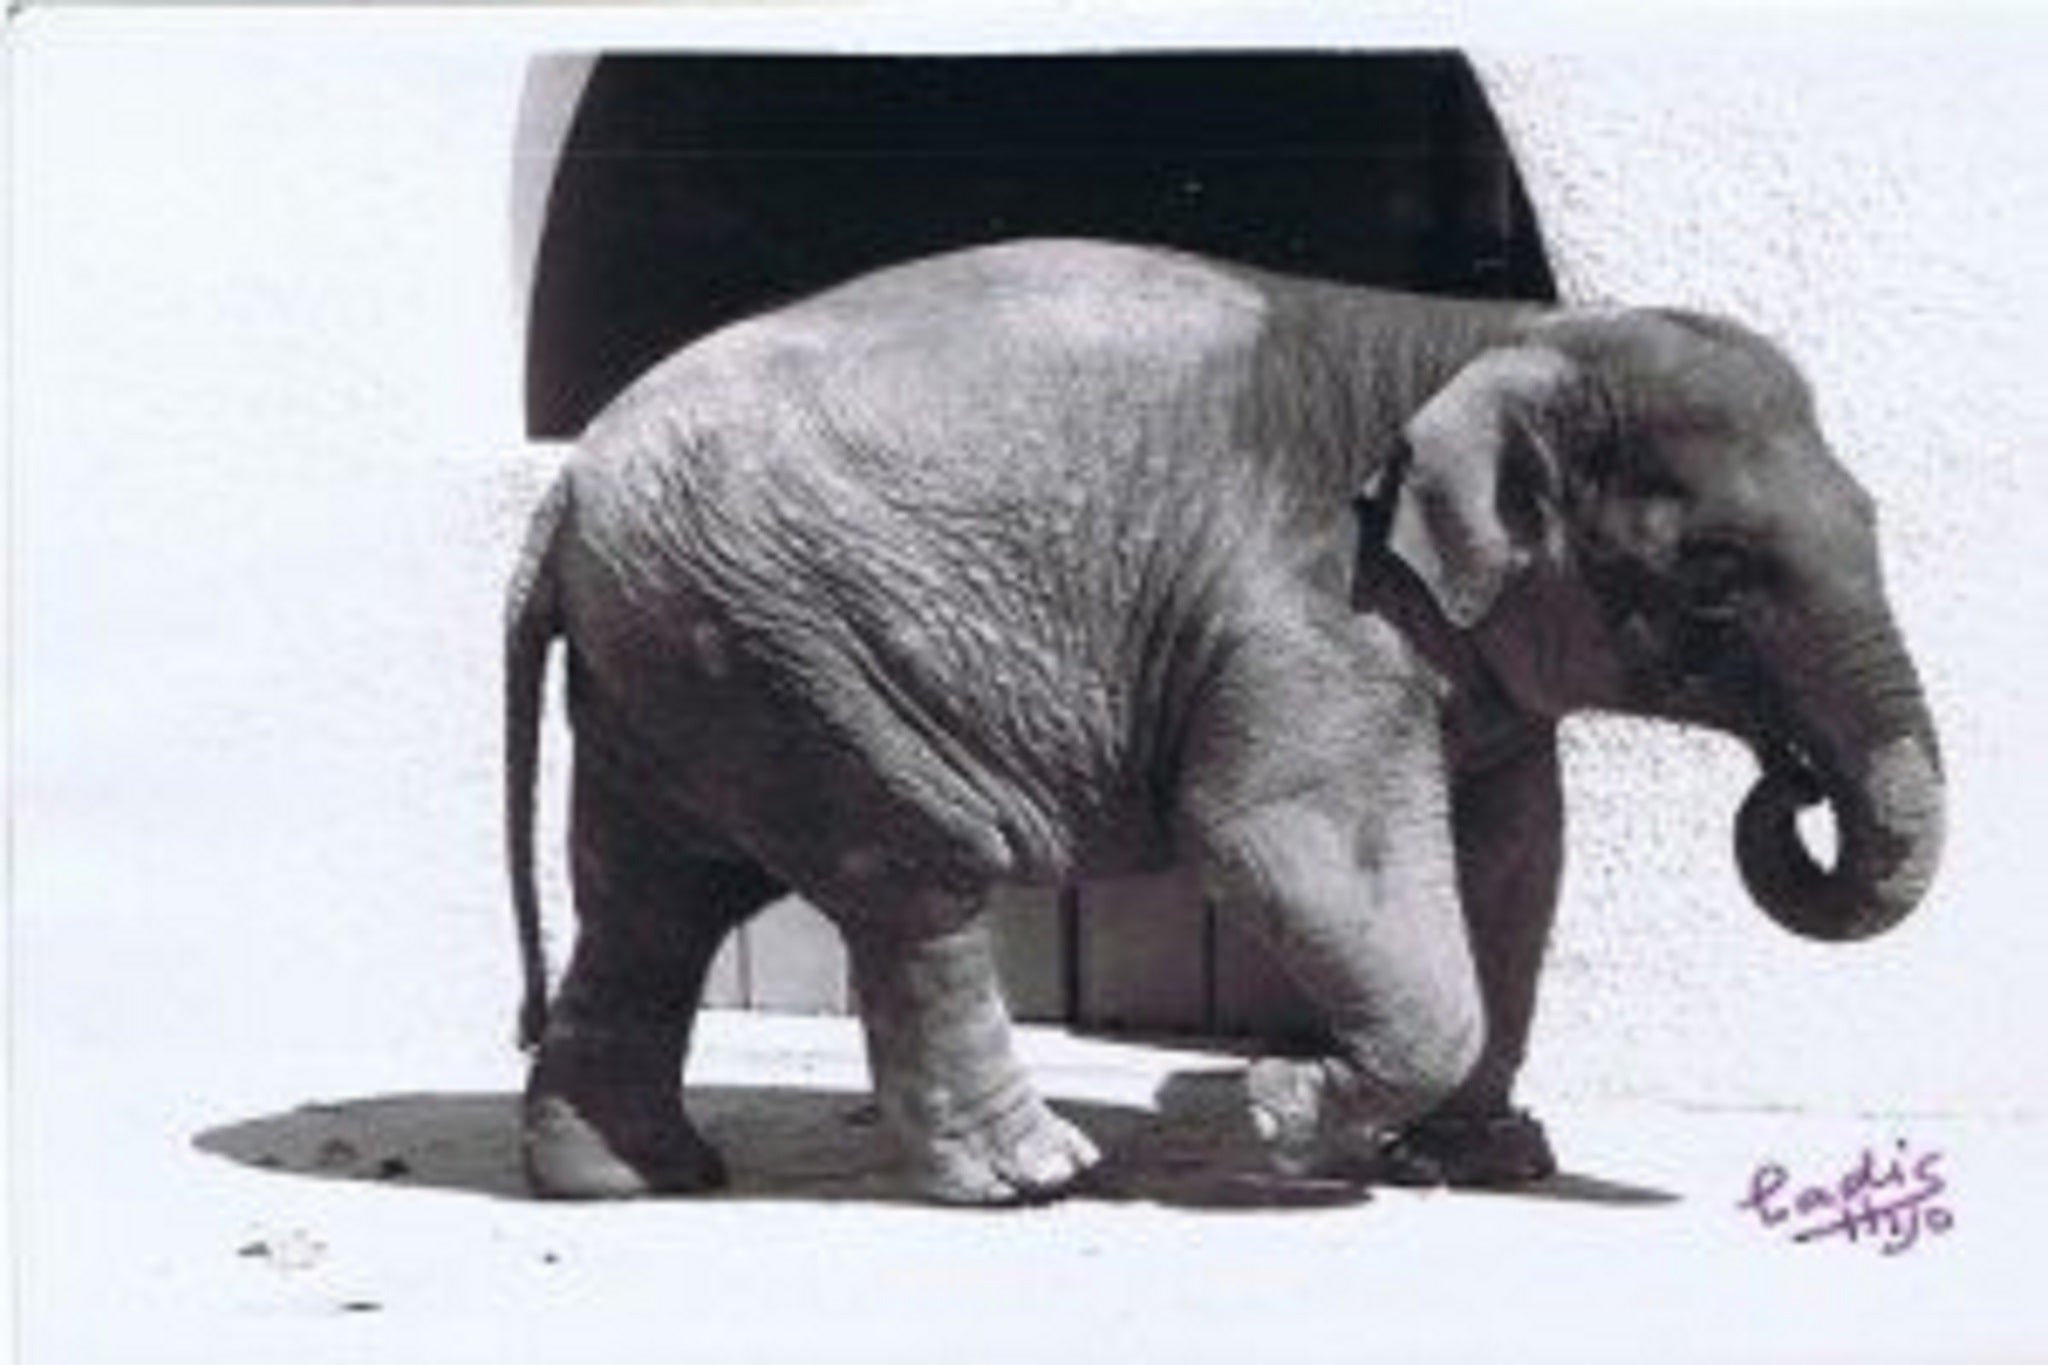 Female Asian elephant Flavia has died after spending 43 years living alone at Cordoba Zoo in southern Spain.